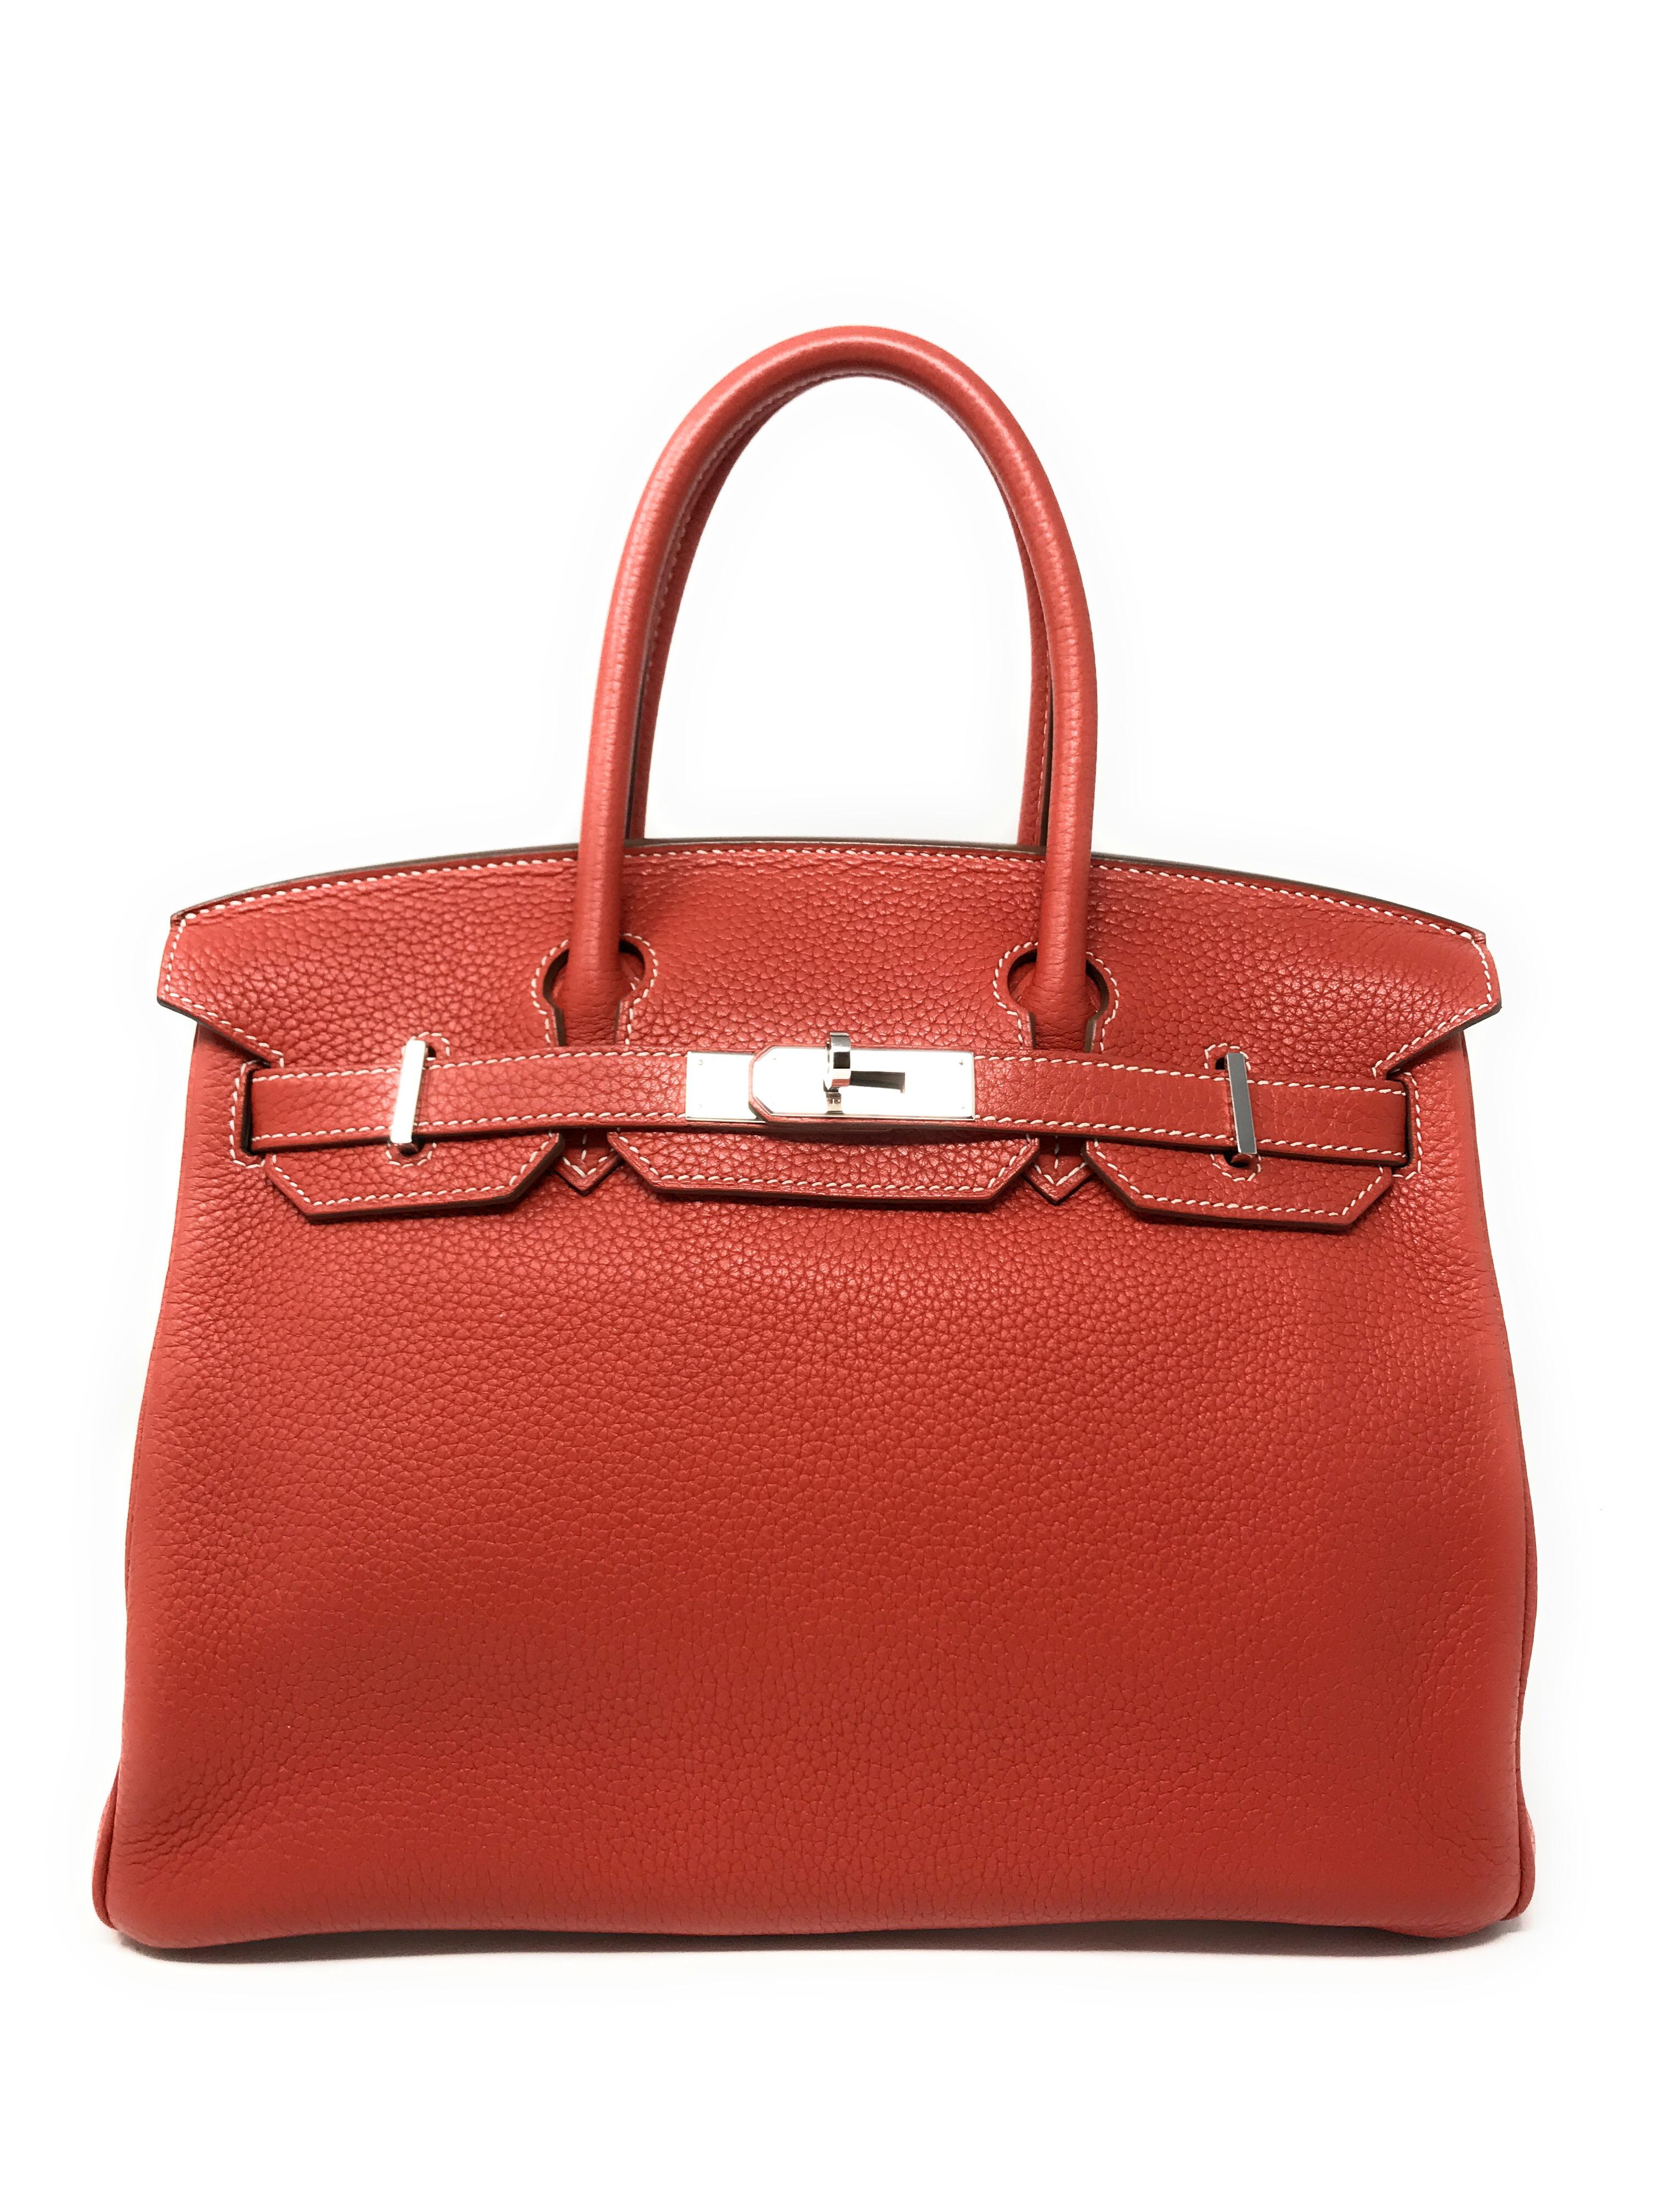 The iconic Hermes Birkin bag in a limited two tone edition of Sanguine and Blanc (white). This is the 30cm size which is in high demand because of its compact proportions that make it suitable for day or evening. It has dual rolled top handles, a